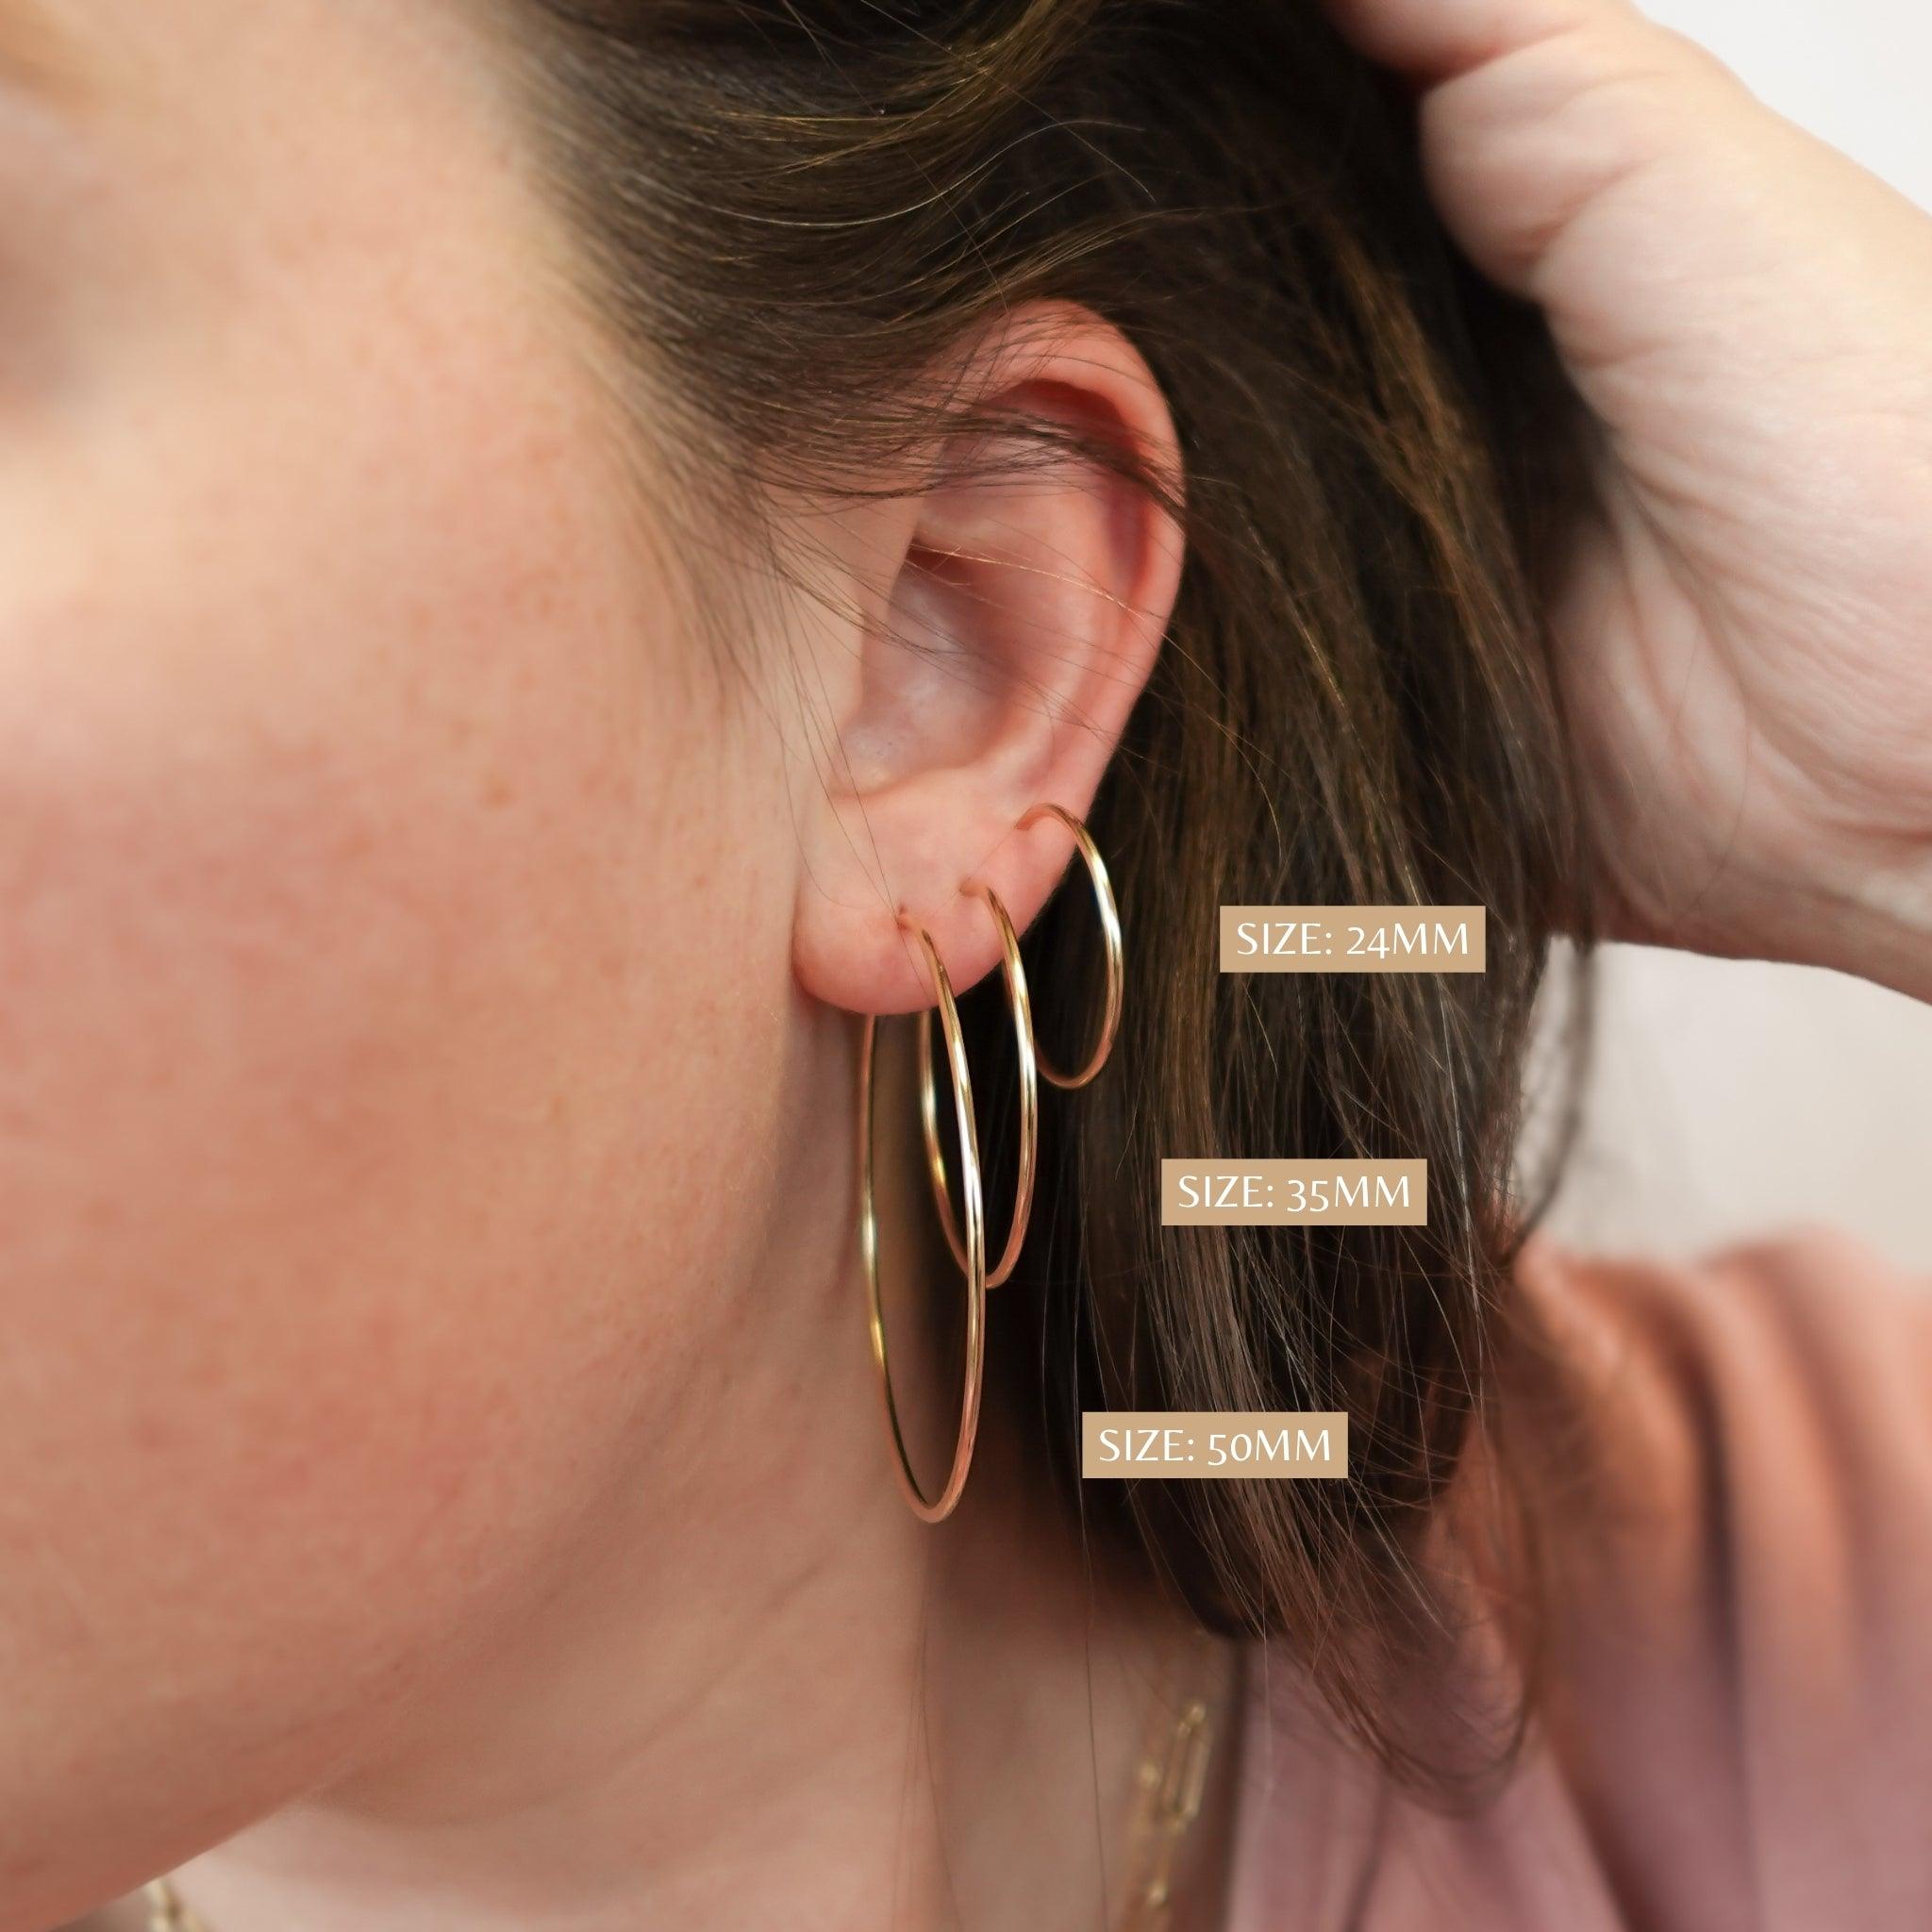 24/7 Endless Hoop Earrings - Nolia Jewelry - Meaningful + Sustainably Handcrafted Jewelry